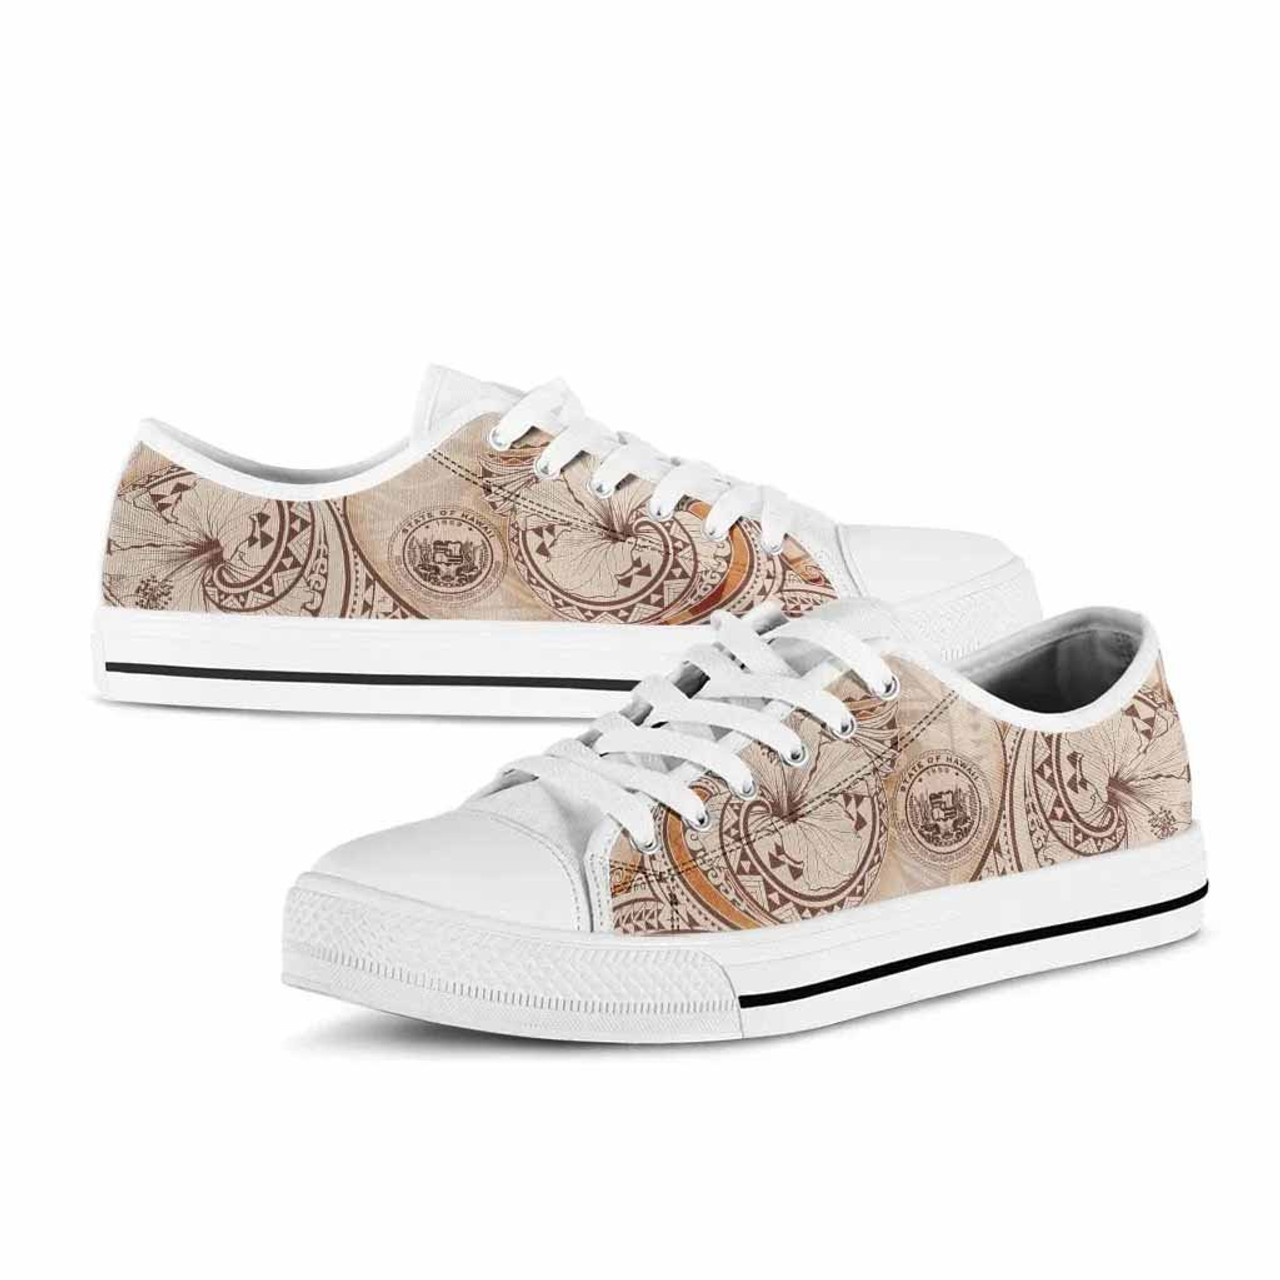 Hawaii Low Top Shoes - Hibiscus Flowers Vintage Style 6